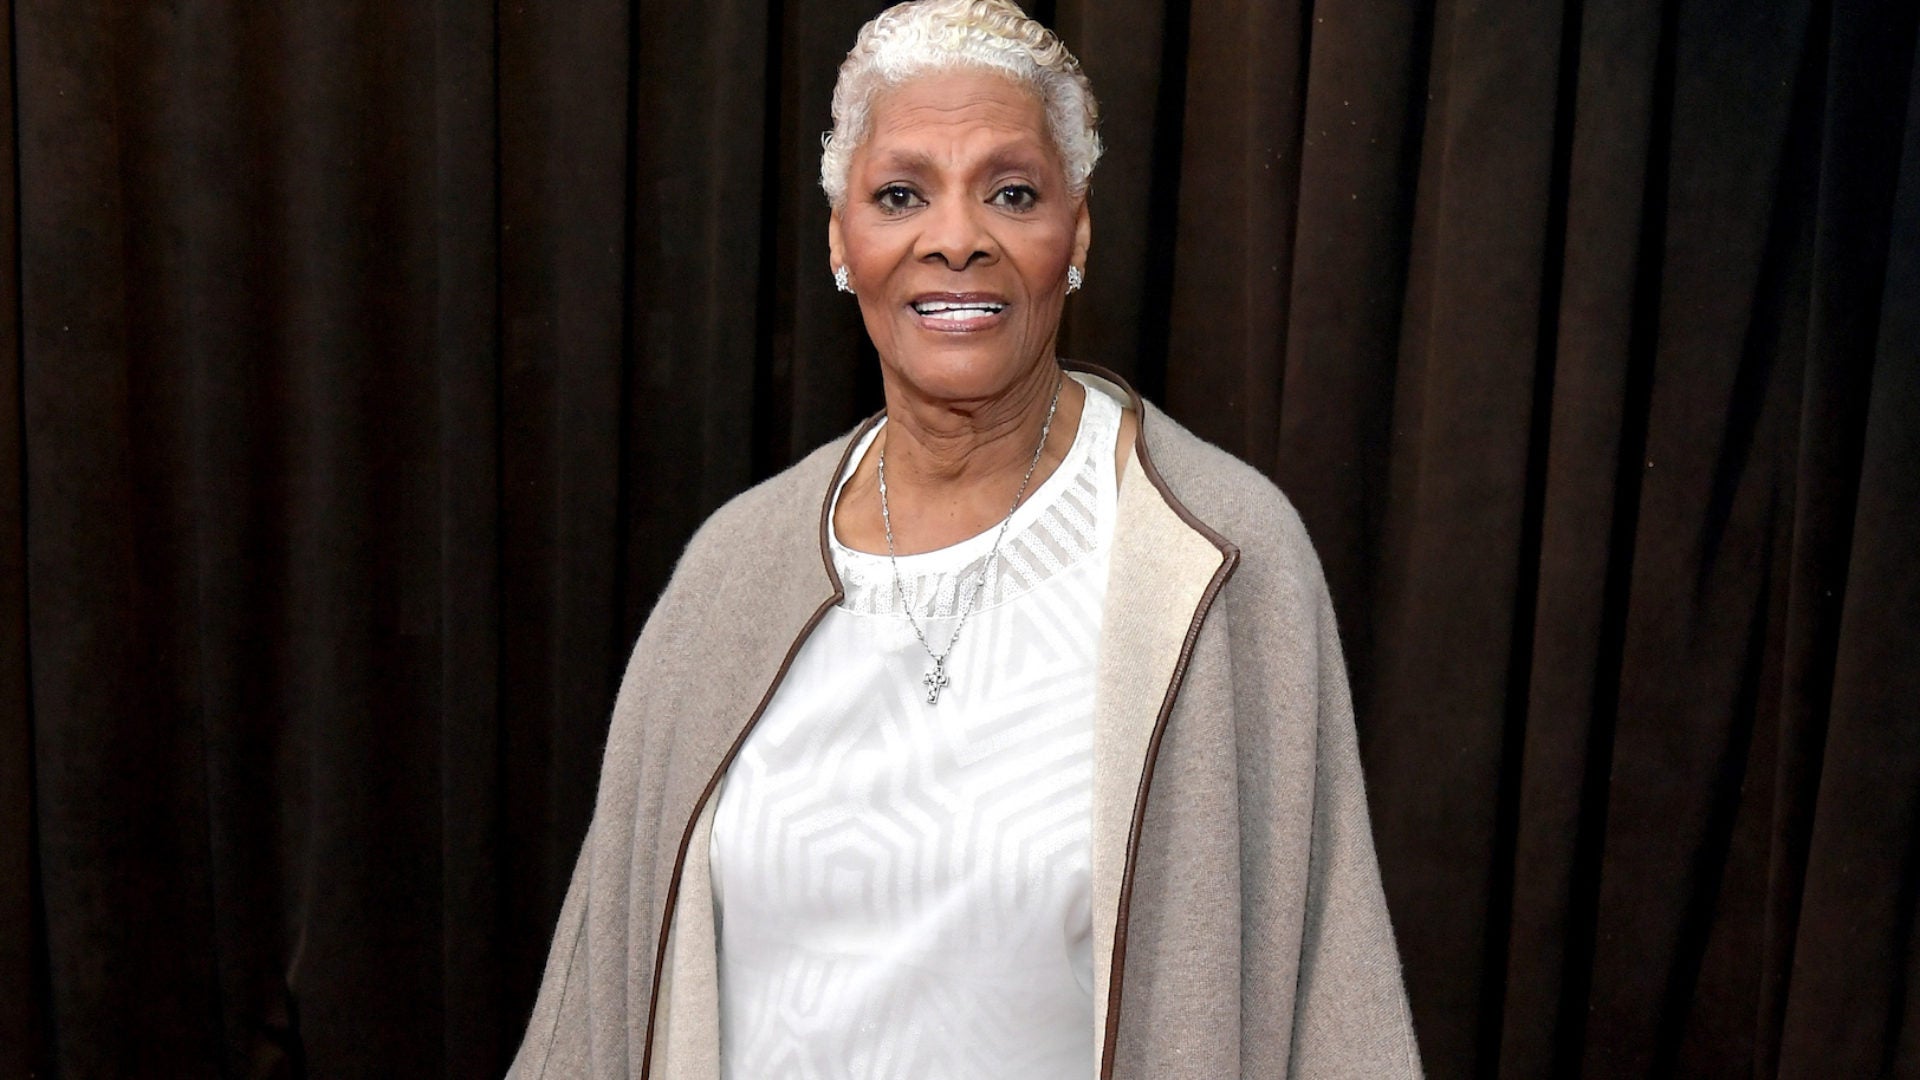 Dionne Warwick Will 'Never Forgive' Those Who Accused Her Sister of Molesting Whitney Houston